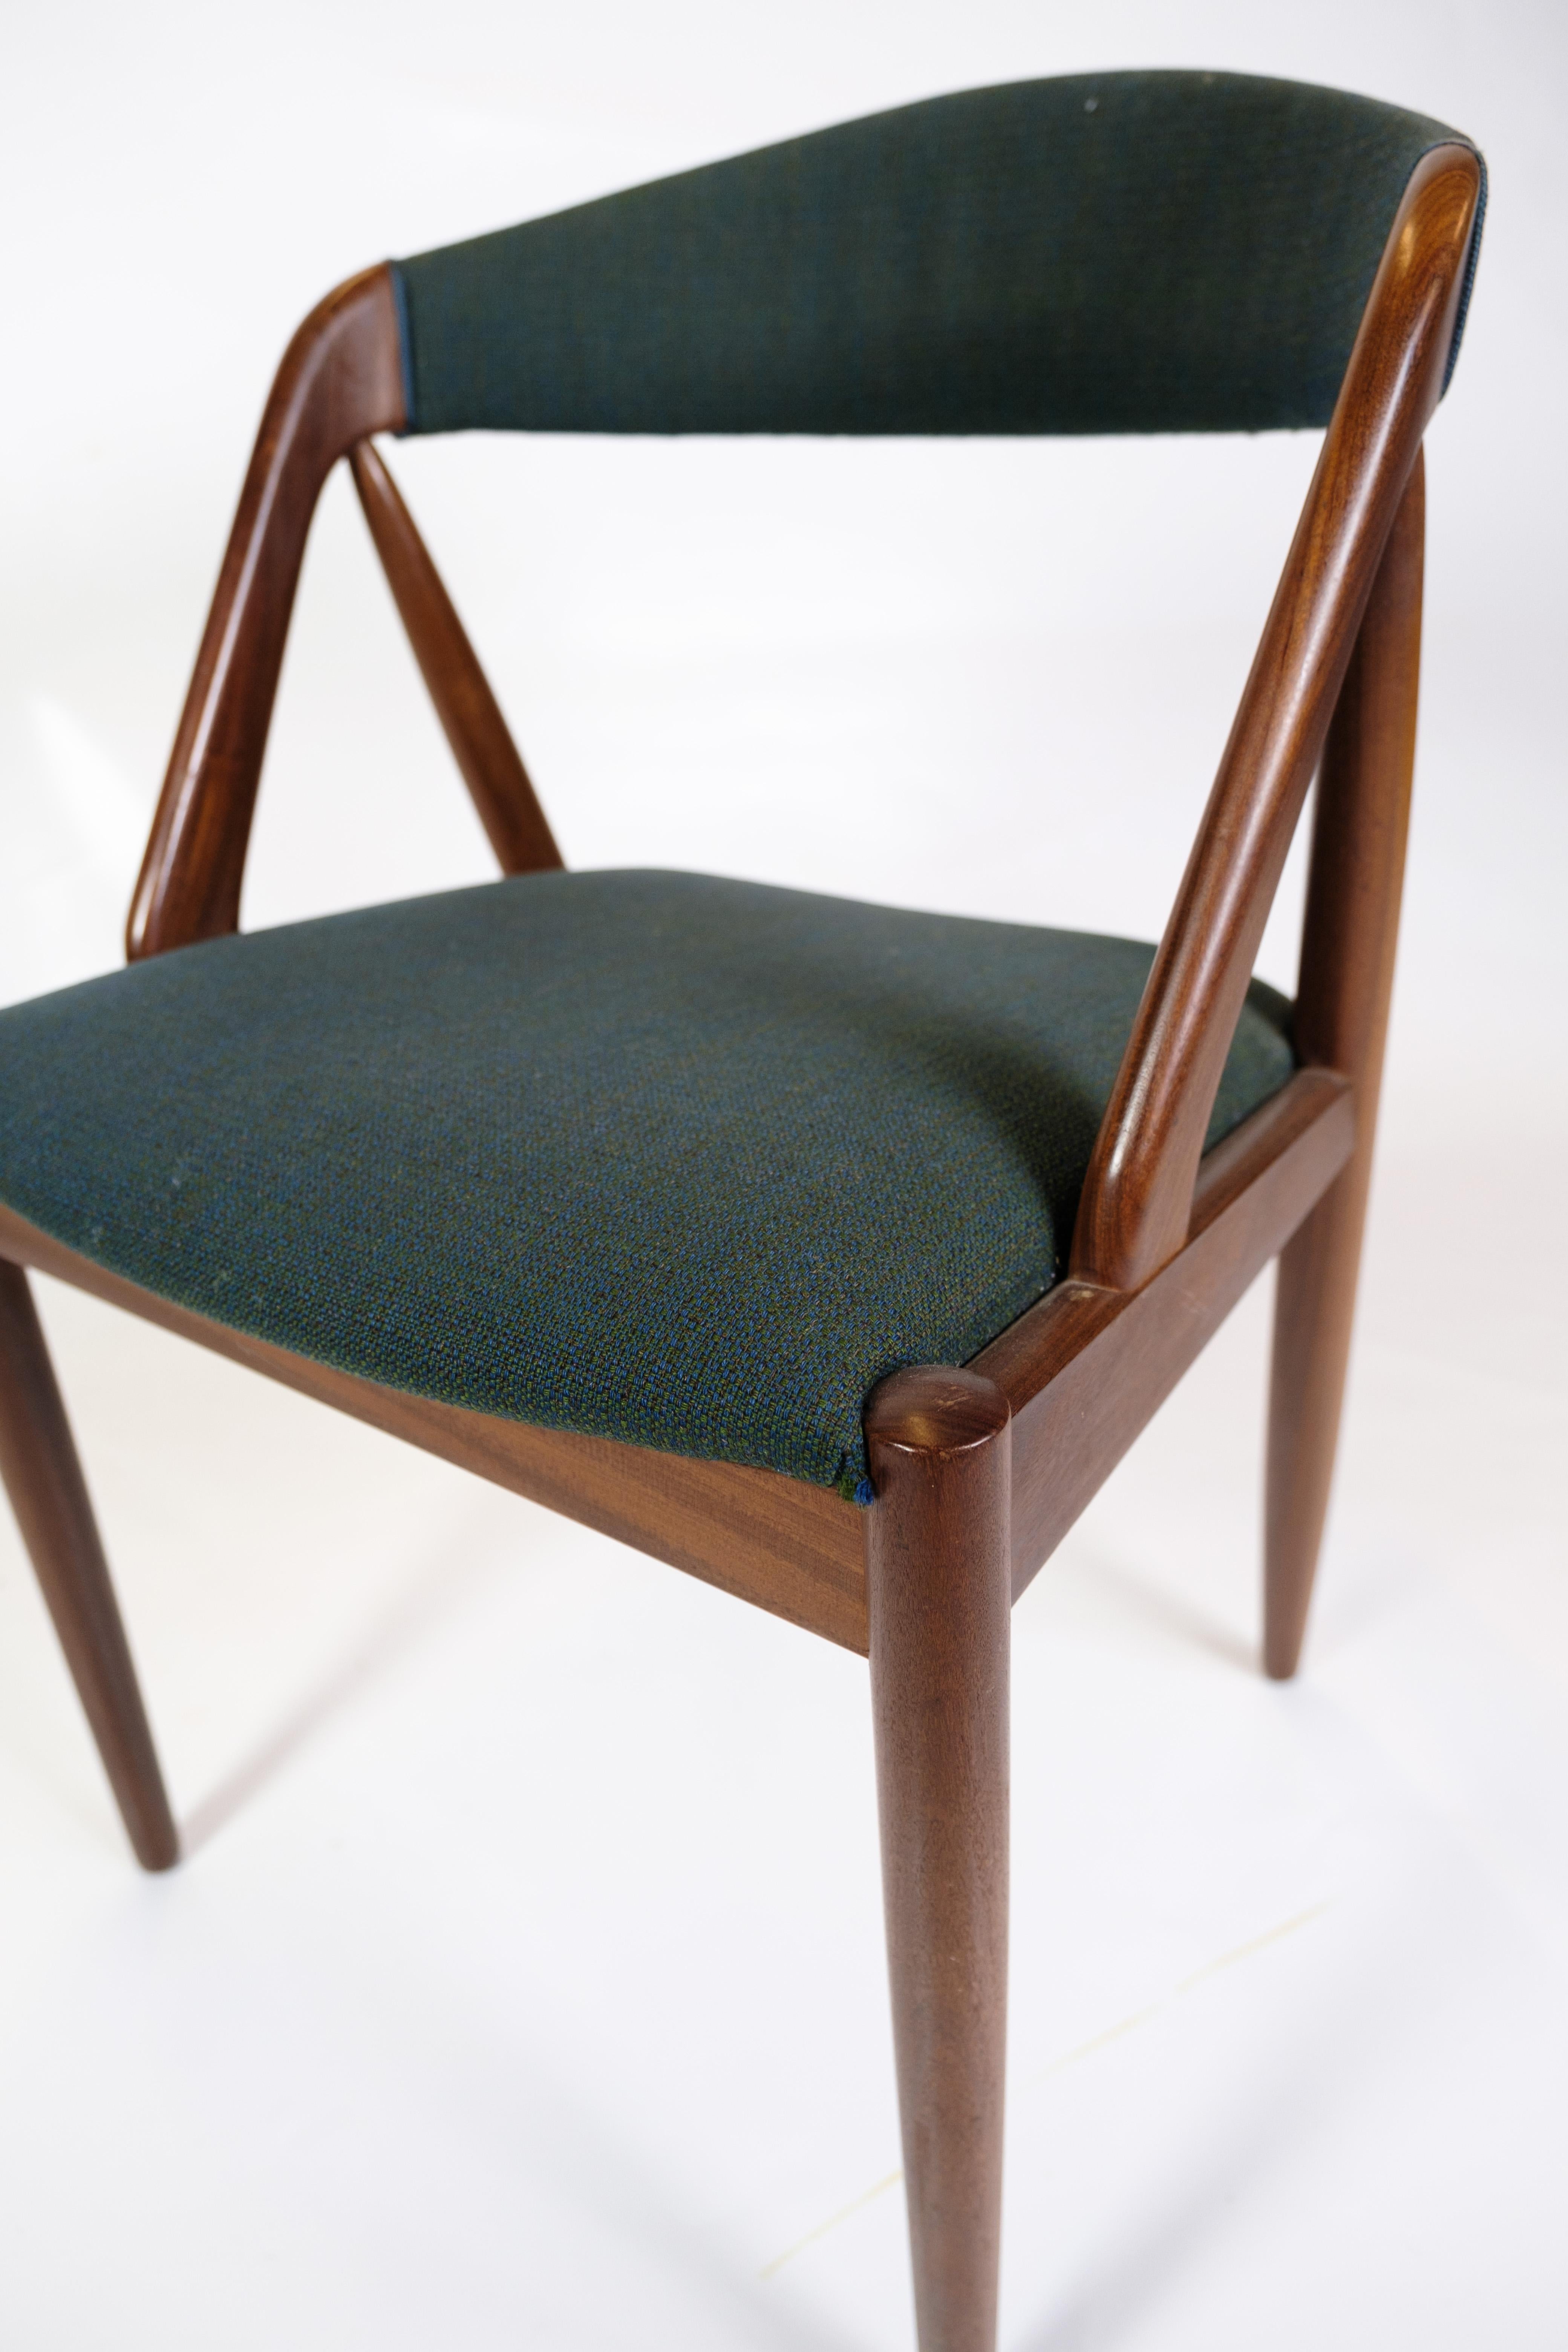 Danish Set Of 6 Dining Room Chairs Model 31 Made In Teak By Kai Kristiansen From 1950 For Sale